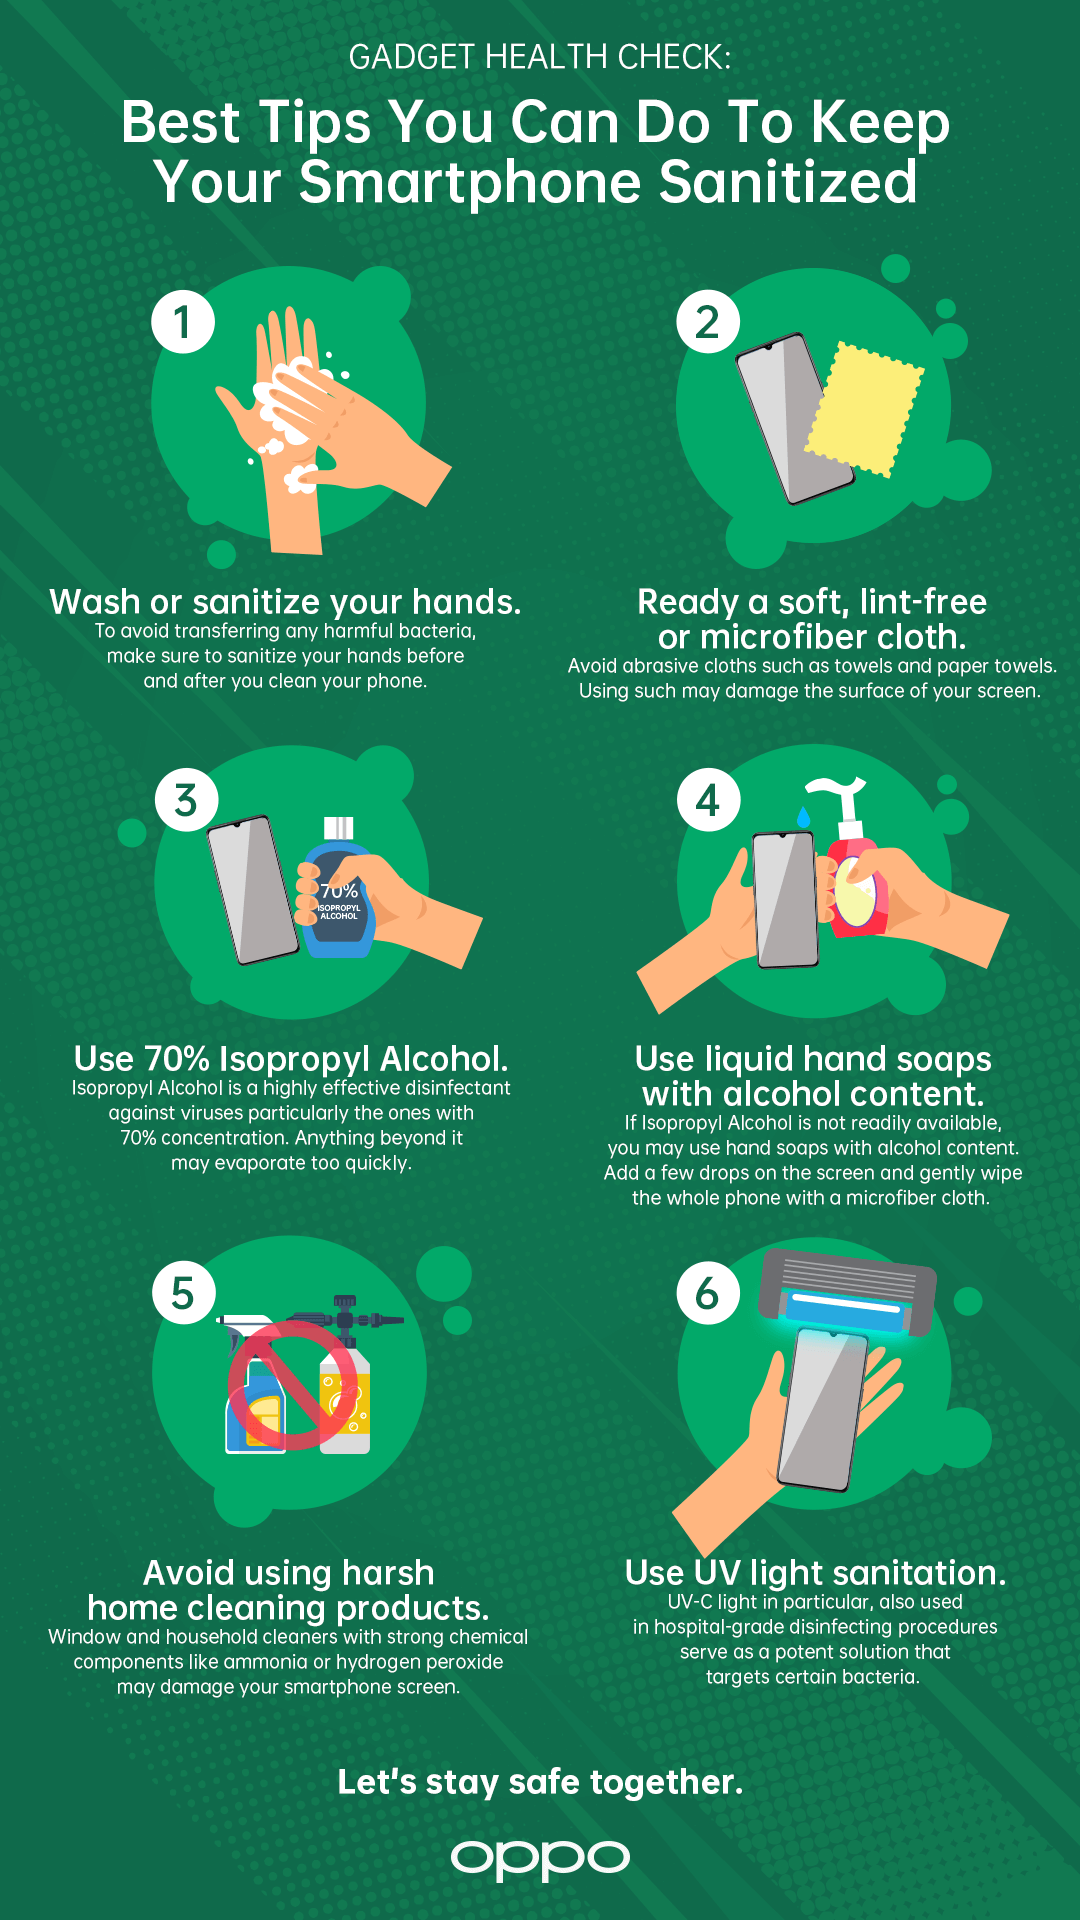 6 tips to keep your phones sanitized - 1